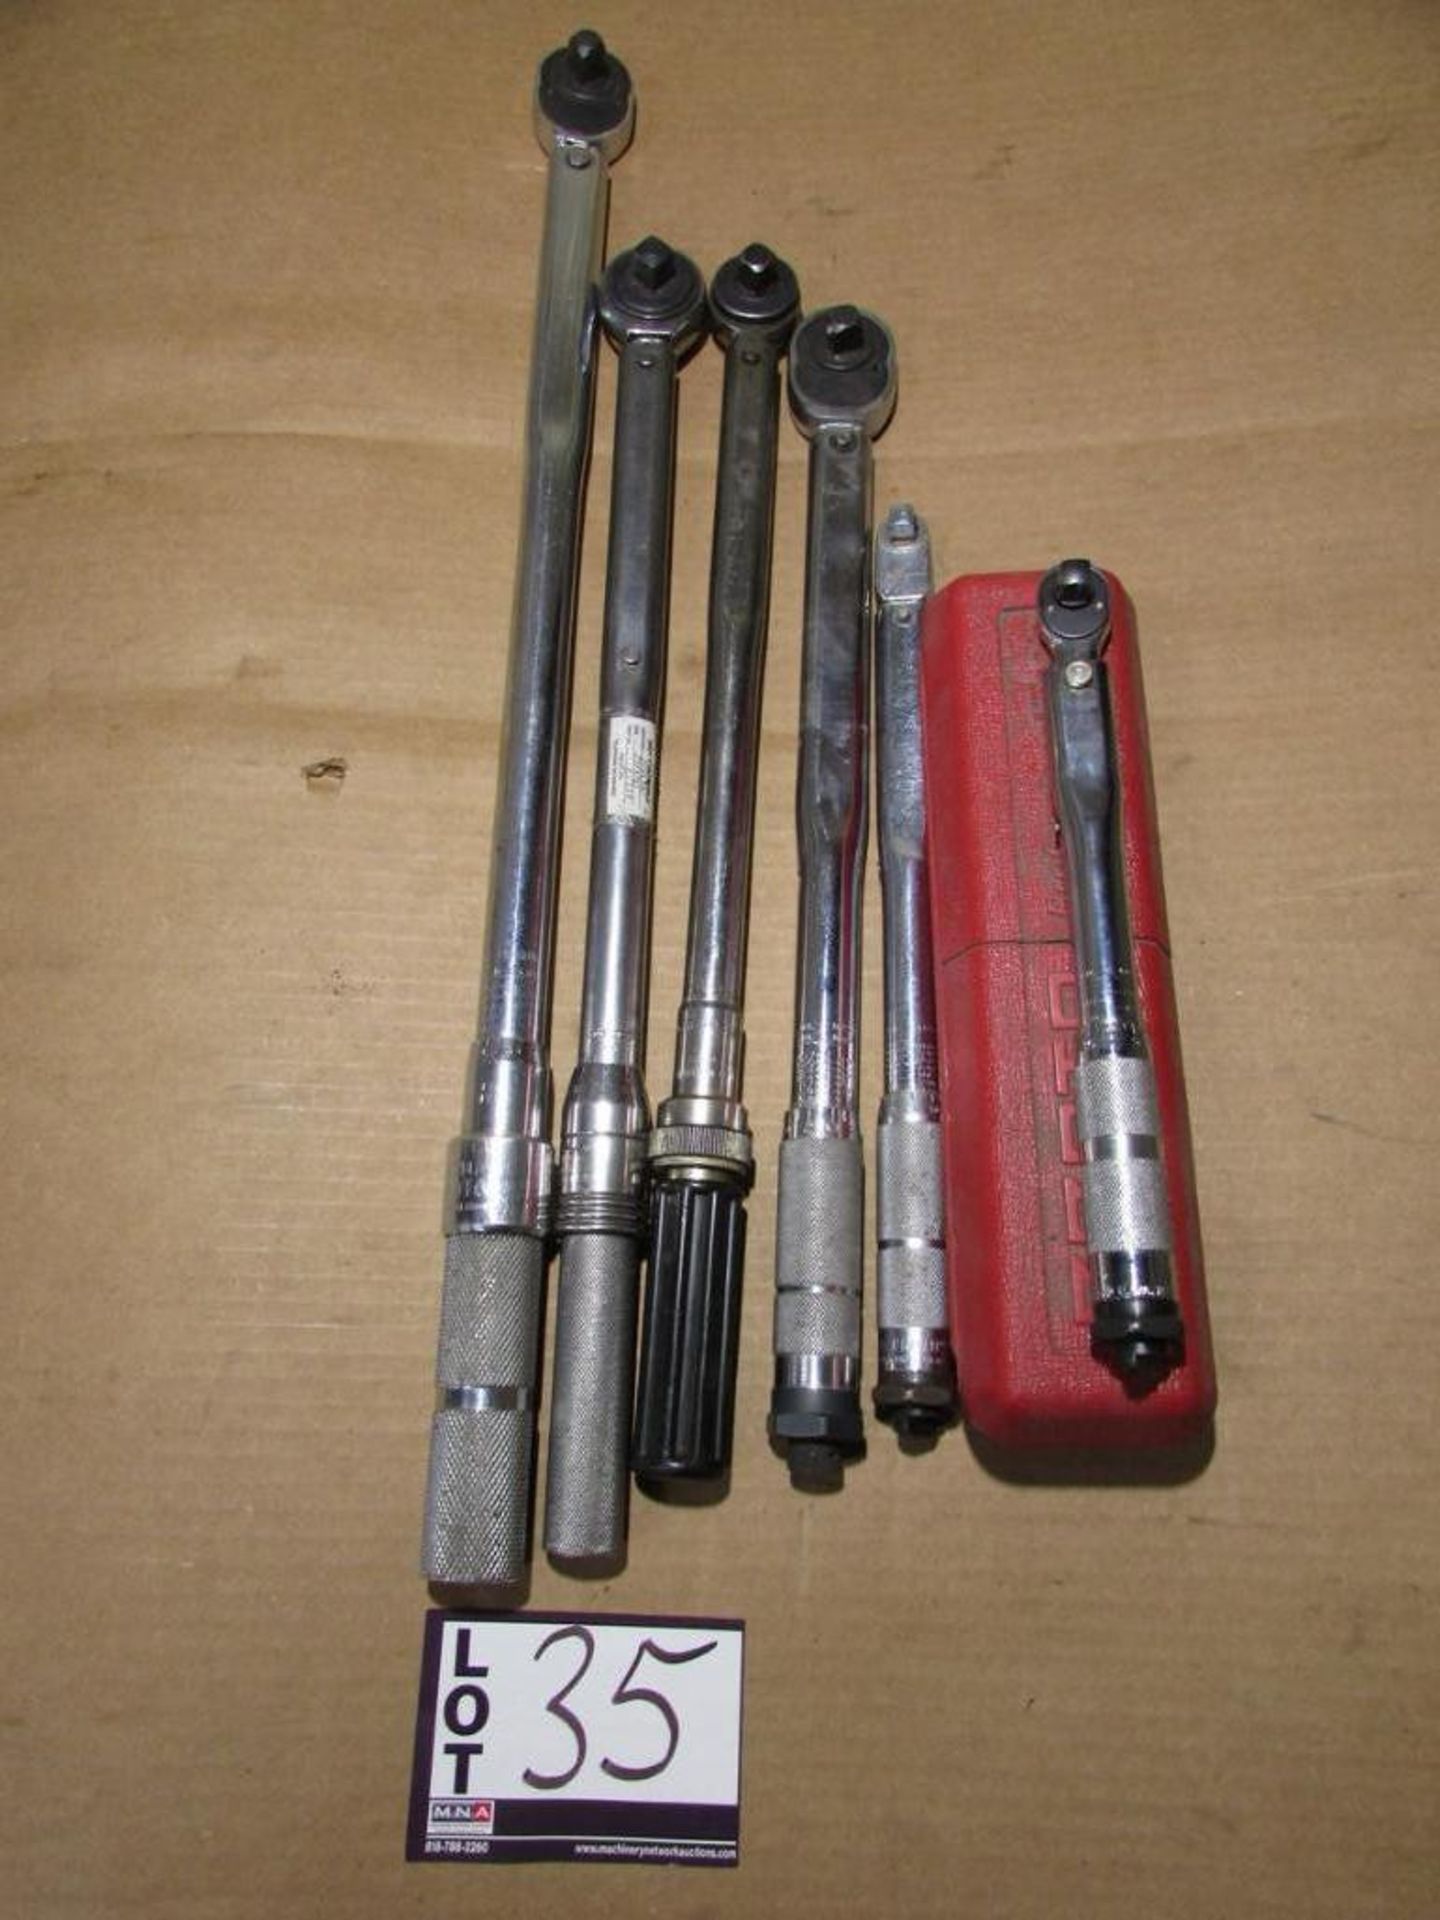 Assorted Torque Wrenches: (1) Proto6014, (1) Utica TCI-250FRN, (1) Armstrong 64-102, (1) Q.Lok 150FT